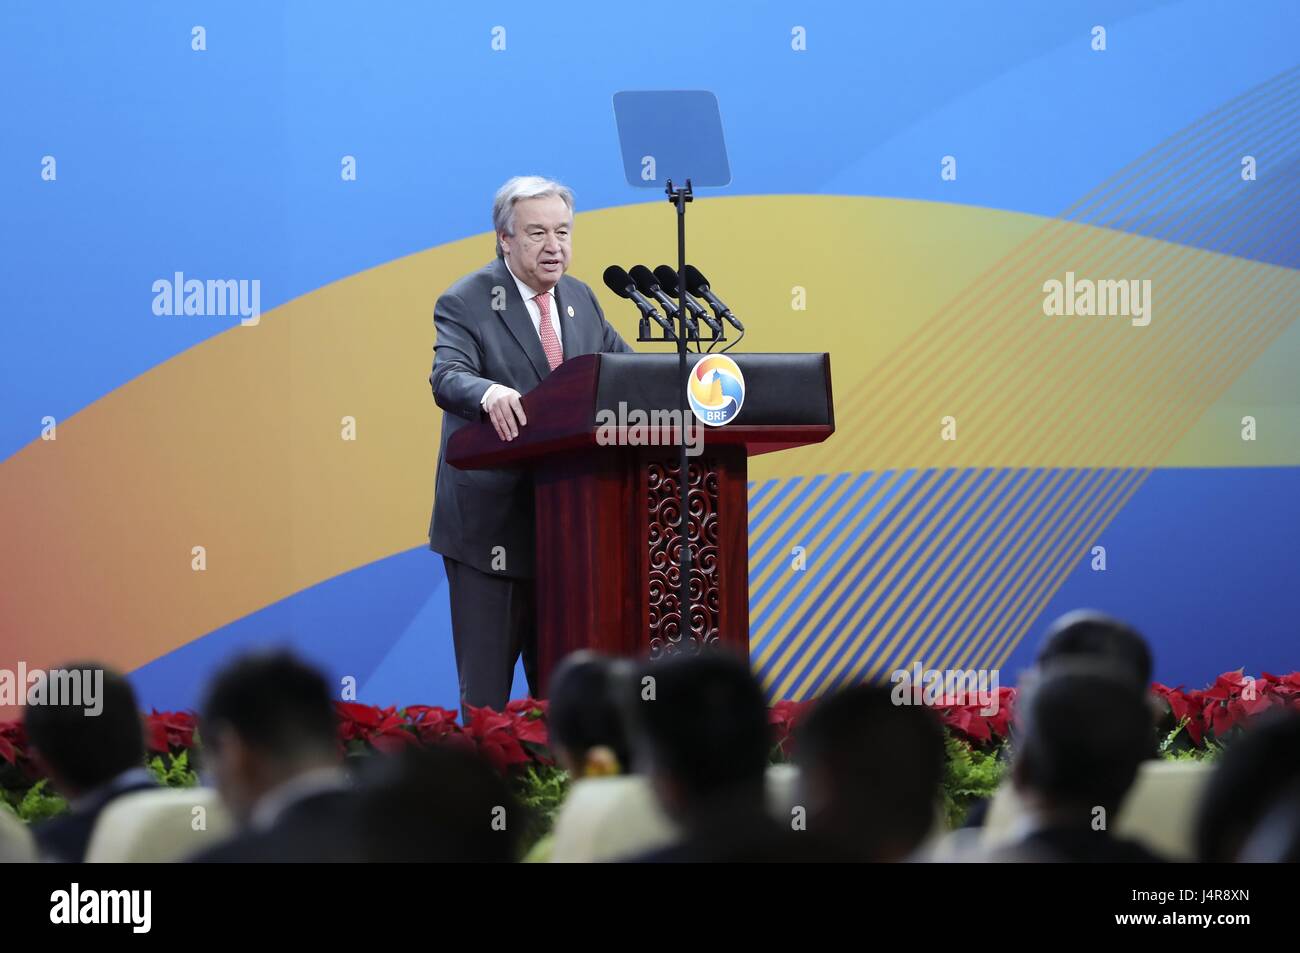 Beijing, China. 14th May, 2017. UN Secretary-General Antonio Guterres addresses the opening ceremony of the Belt and Road Forum for International Cooperation in Beijing, capital of China, May 14, 2017. Credit: Pang Xinglei/Xinhua/Alamy Live News Stock Photo